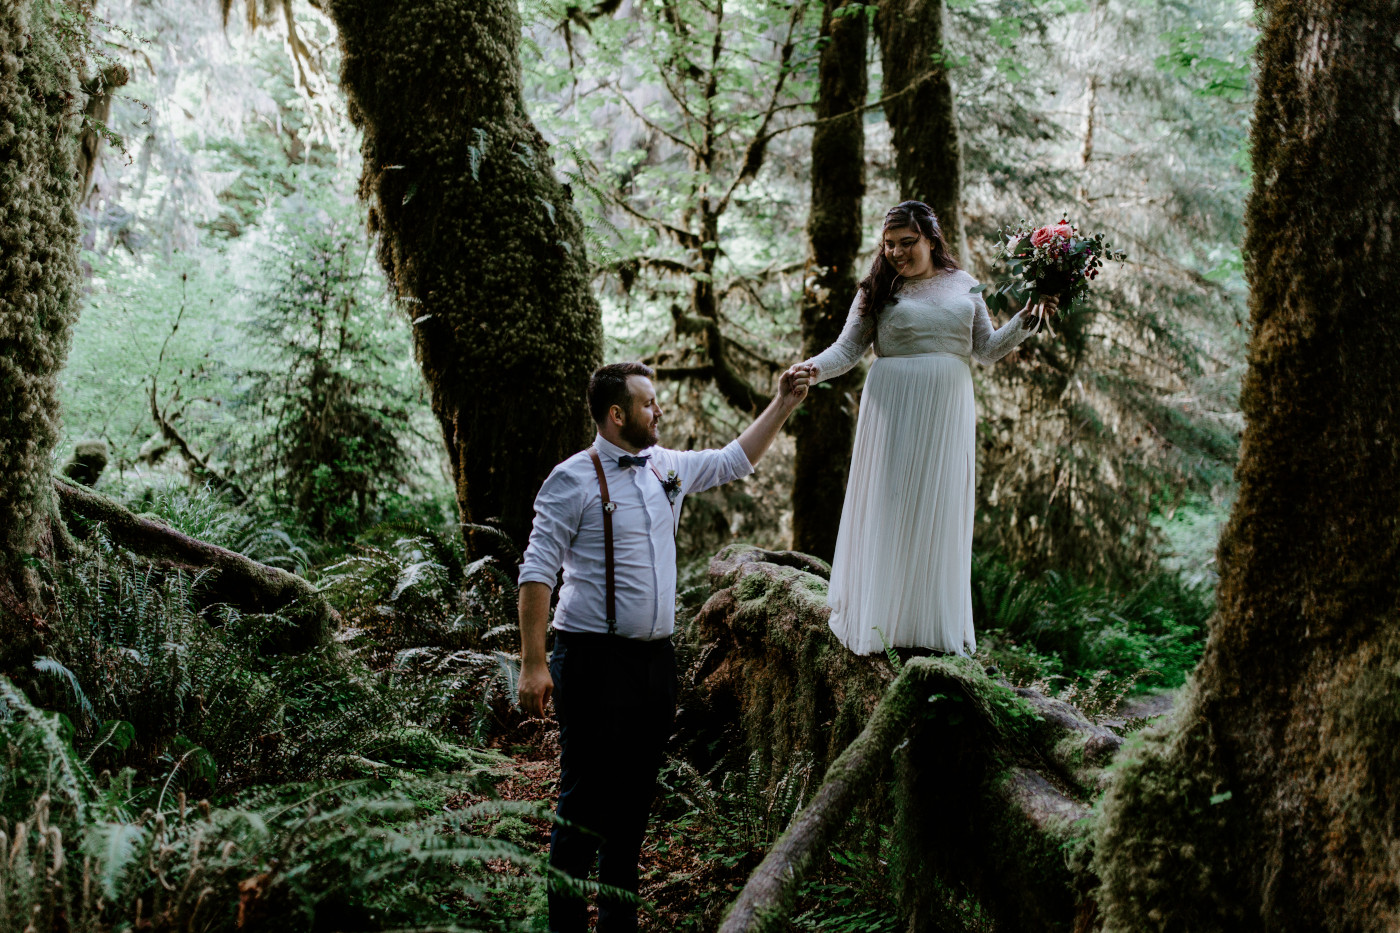 Brooke and Jack walking in the woods. Elopement photography at Olympic National Park by Sienna Plus Josh.